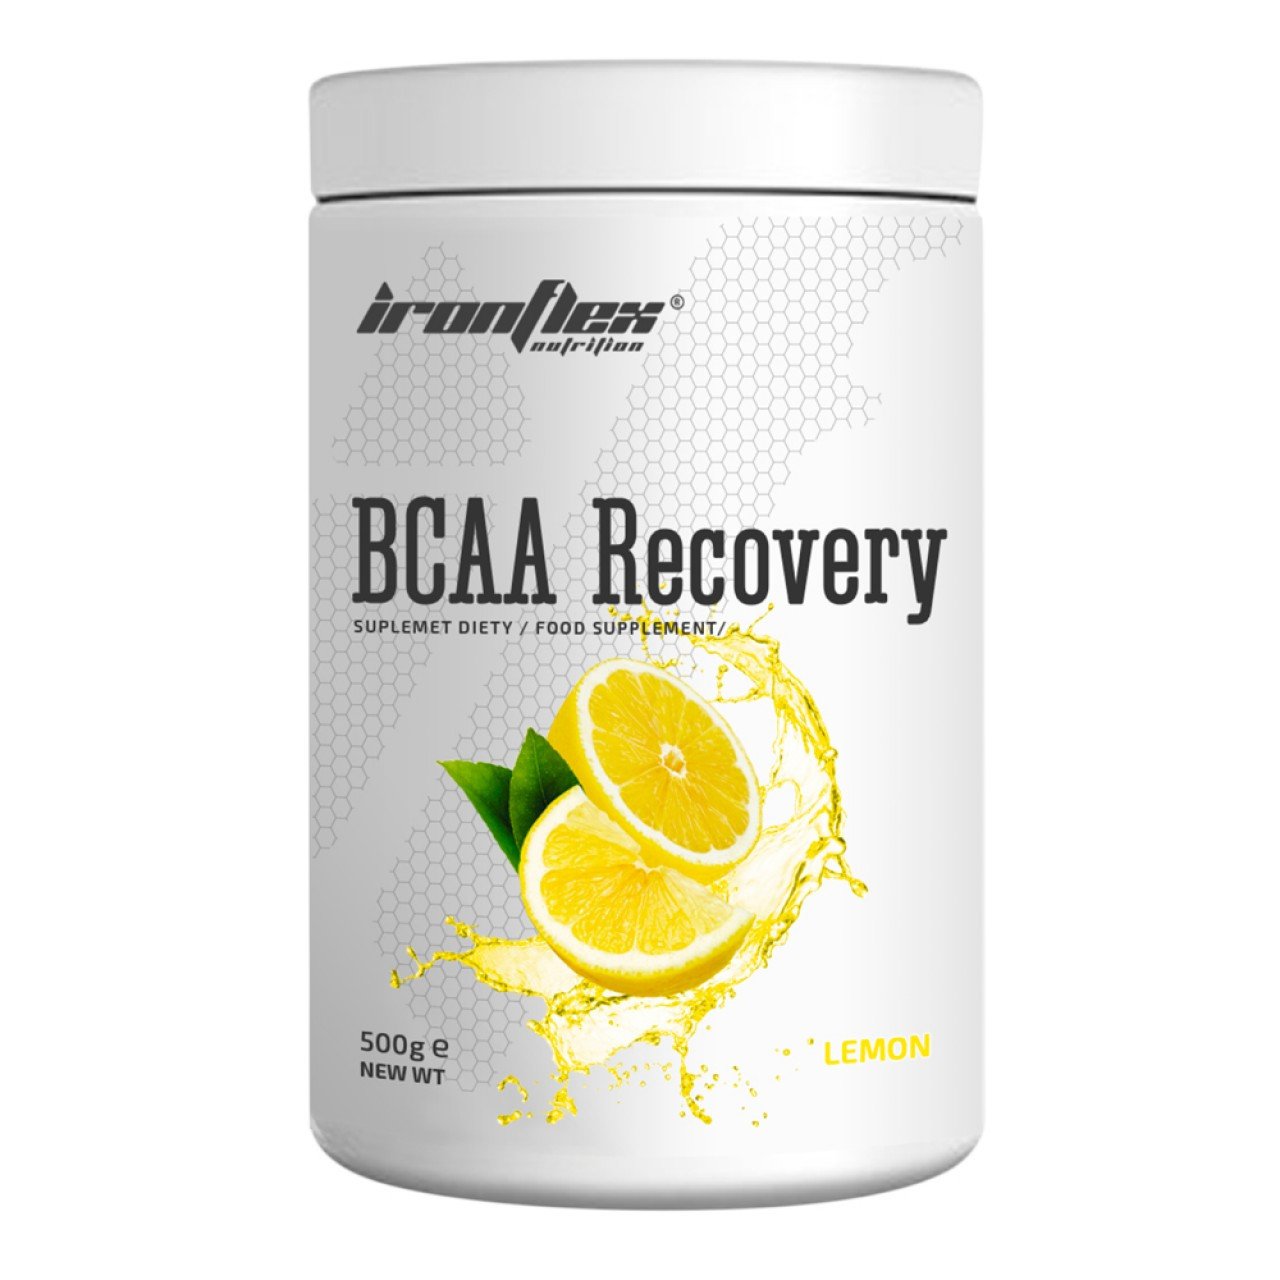 БЦАА IronFlex BCAA Recovery 500 грам Лимон,  ml, IronFlex. BCAA. Weight Loss recovery Anti-catabolic properties Lean muscle mass 